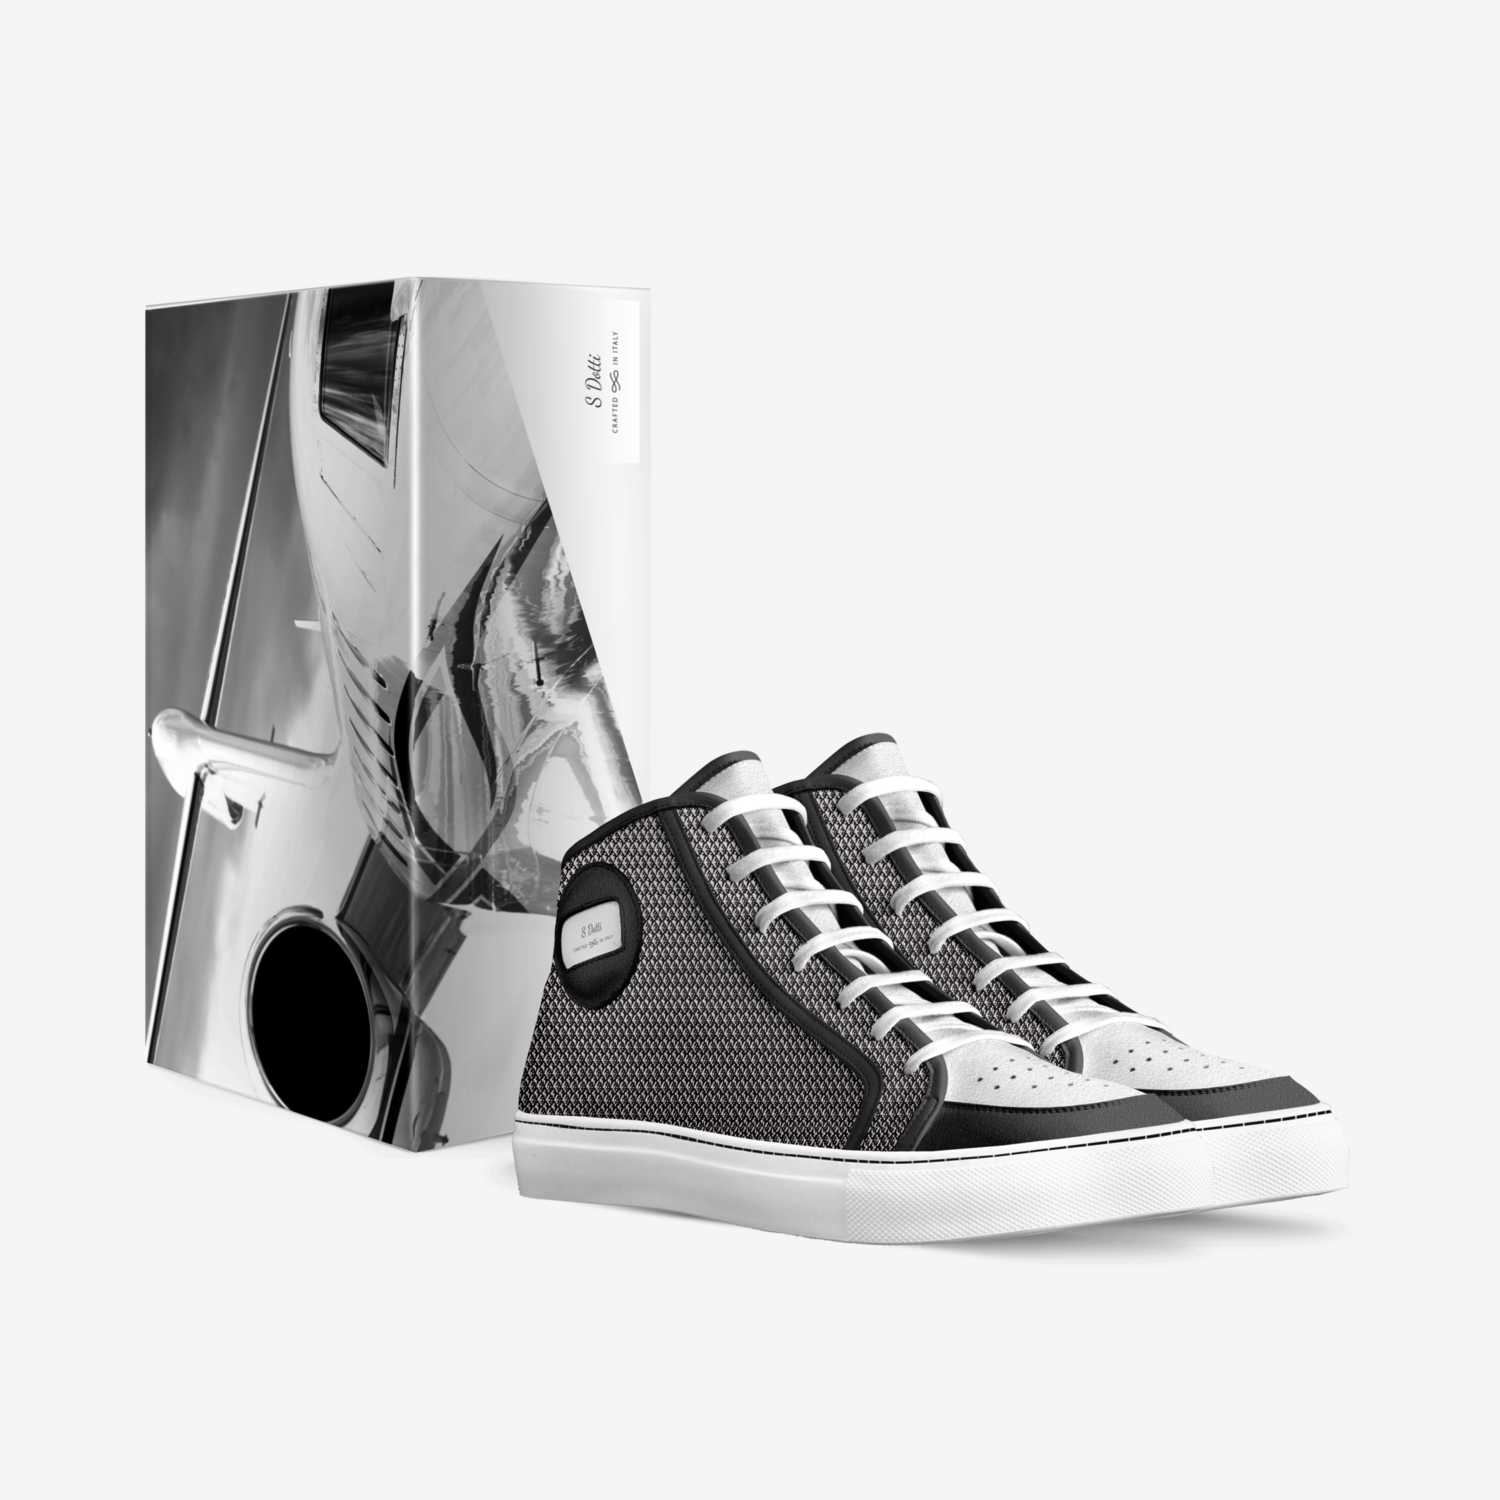 S Dotti custom made in Italy shoes by Sean Trotter | Box view